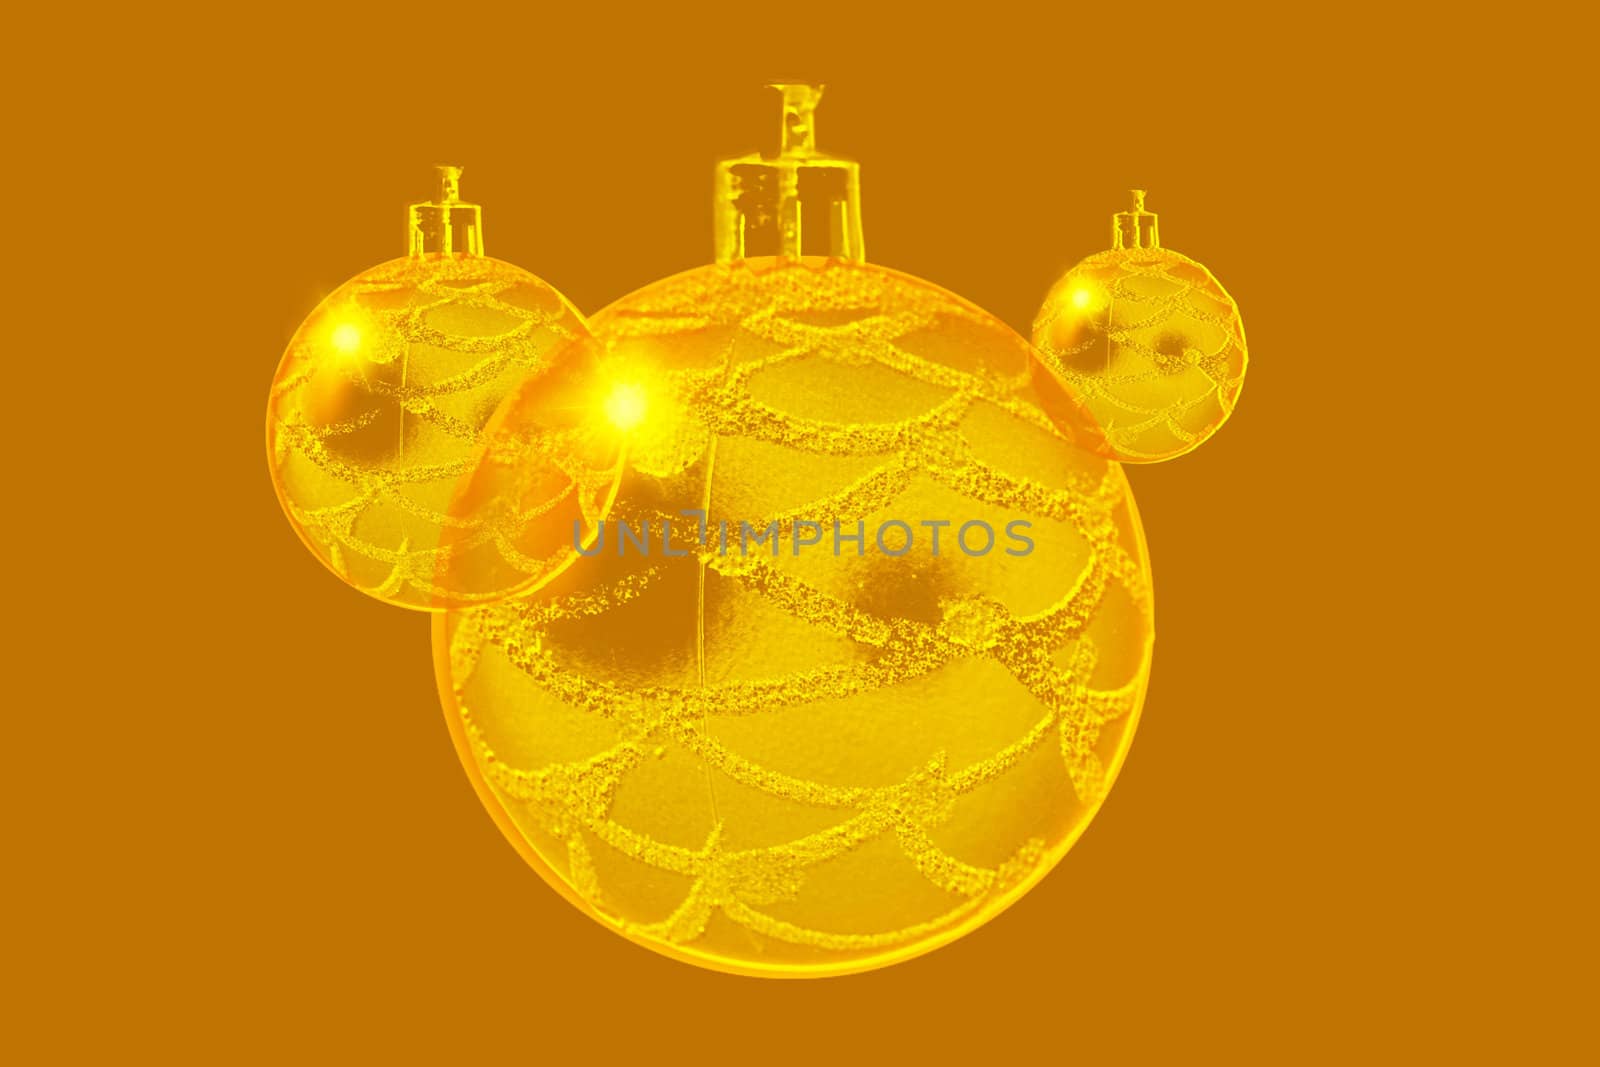 Abstract design concept of three gold ornaments.